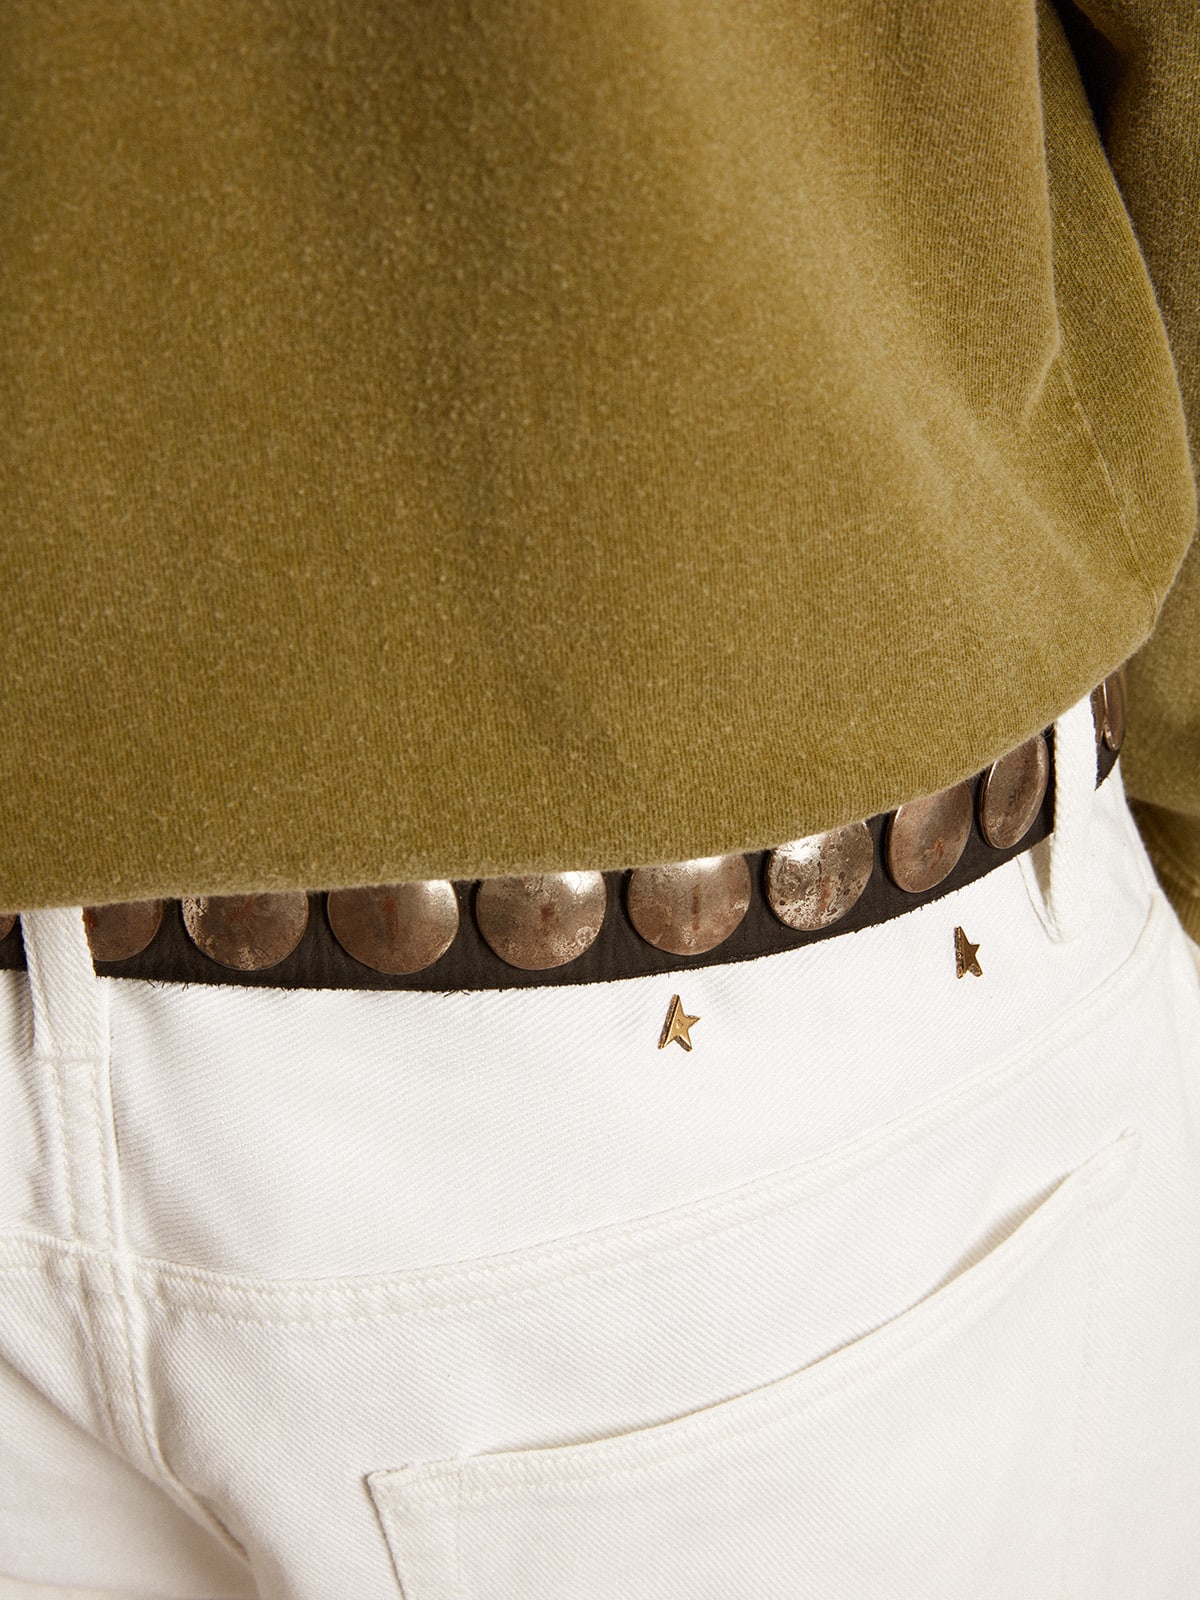 Golden Goose - Stonewashed-effect white jeans in 